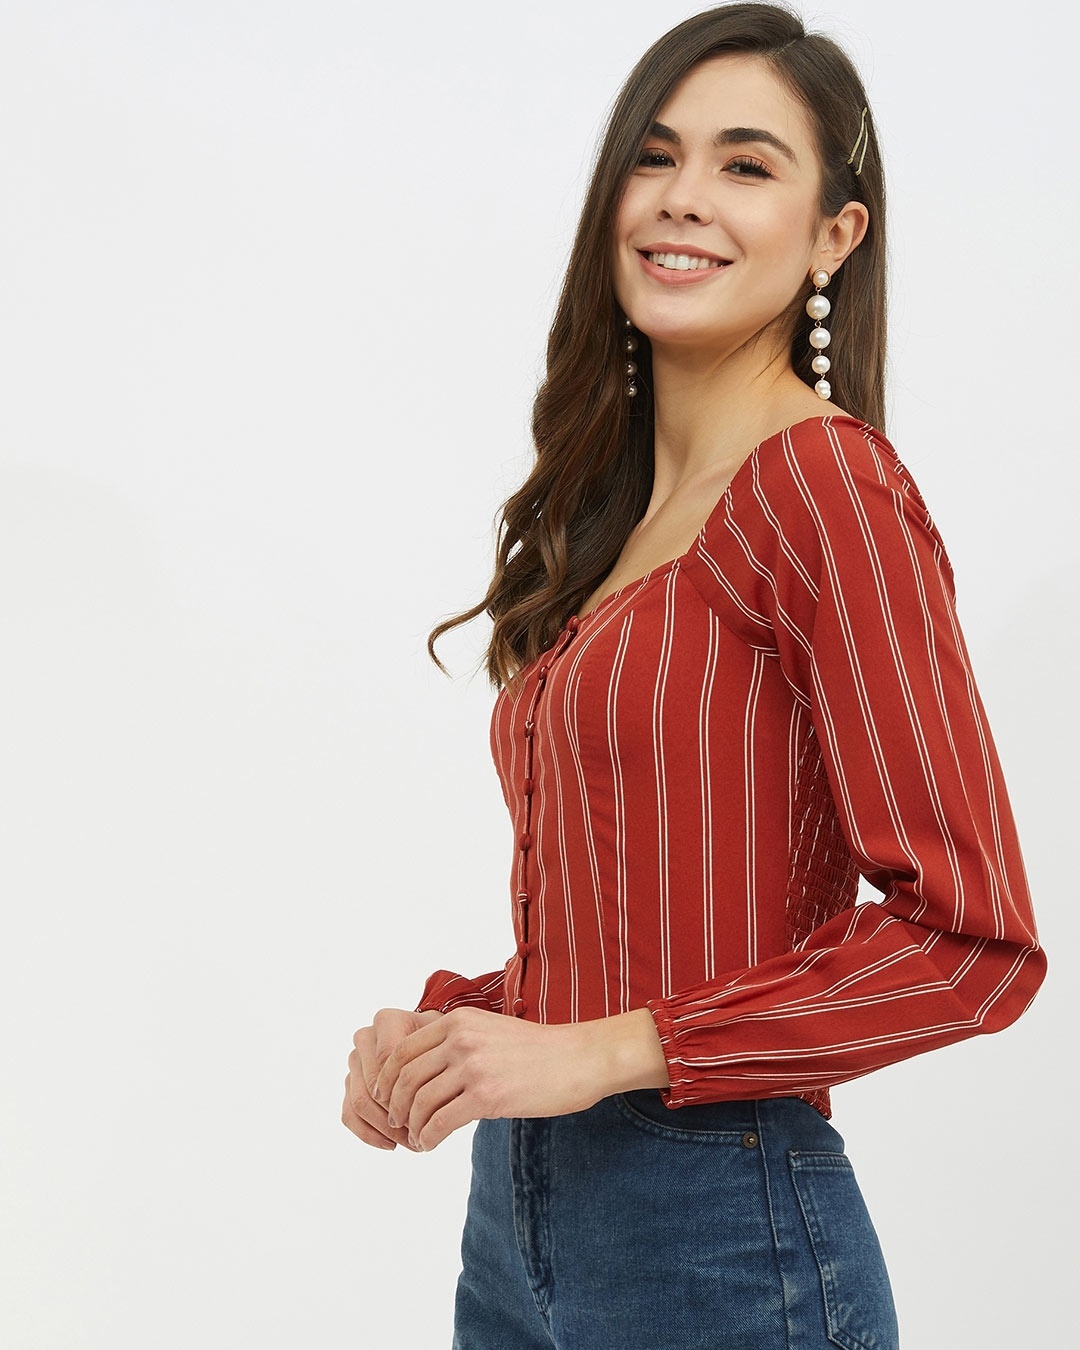 Shop Women's Square Neck Full Sleeve Striped Top